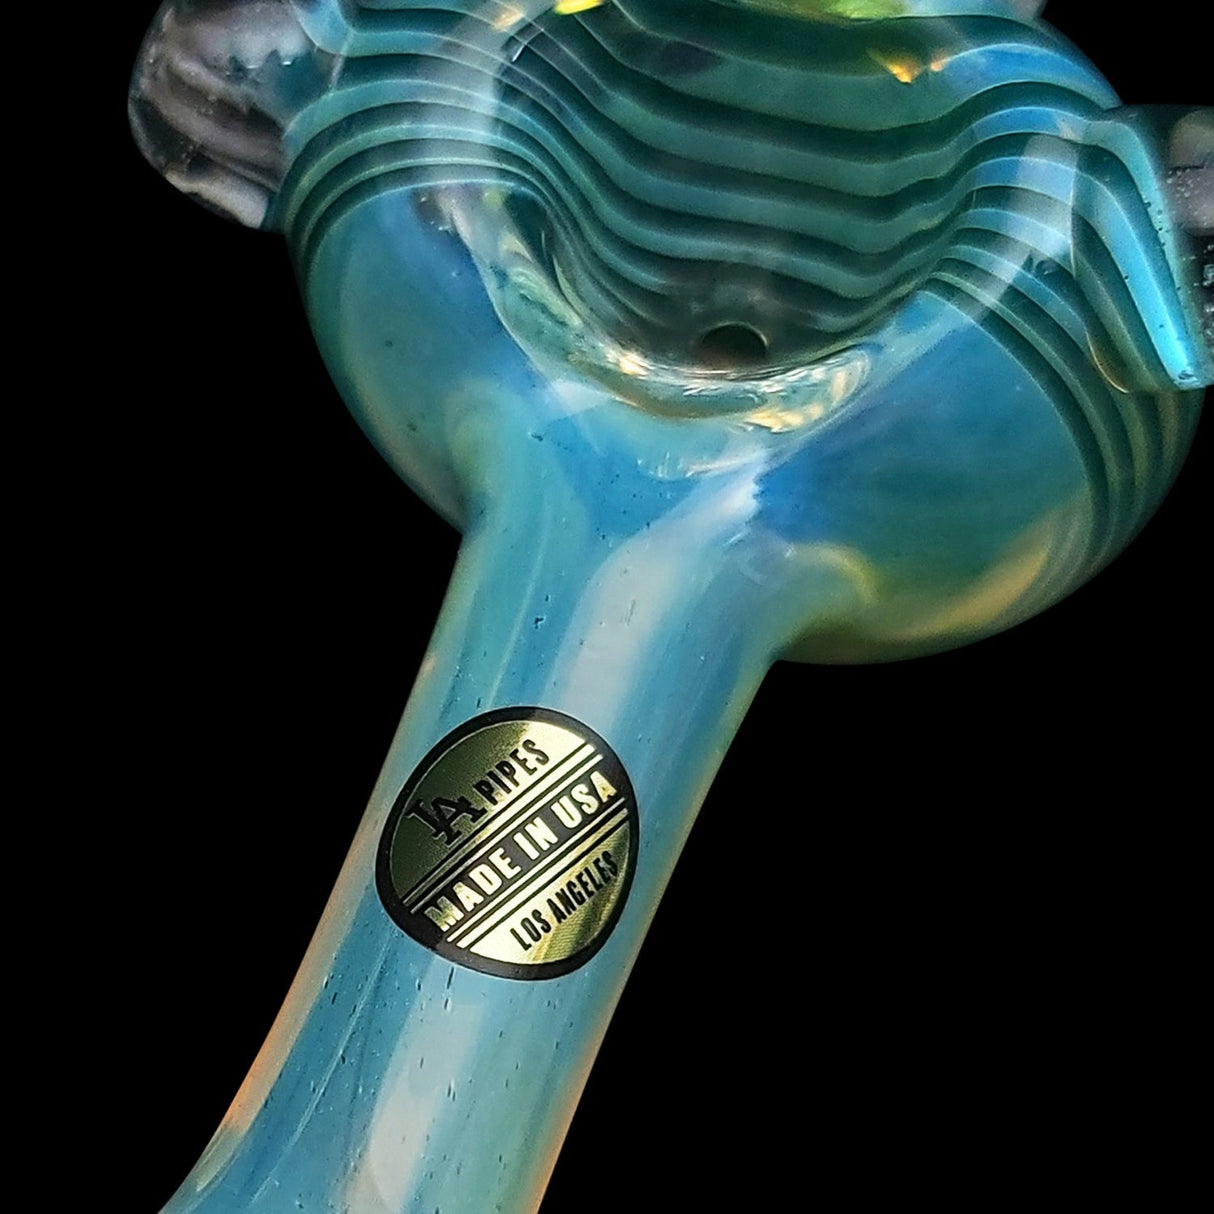 LA Pipes "Spiral Marble Head" Glass Spoon Pipe, Assorted Colors, Close-Up Side View